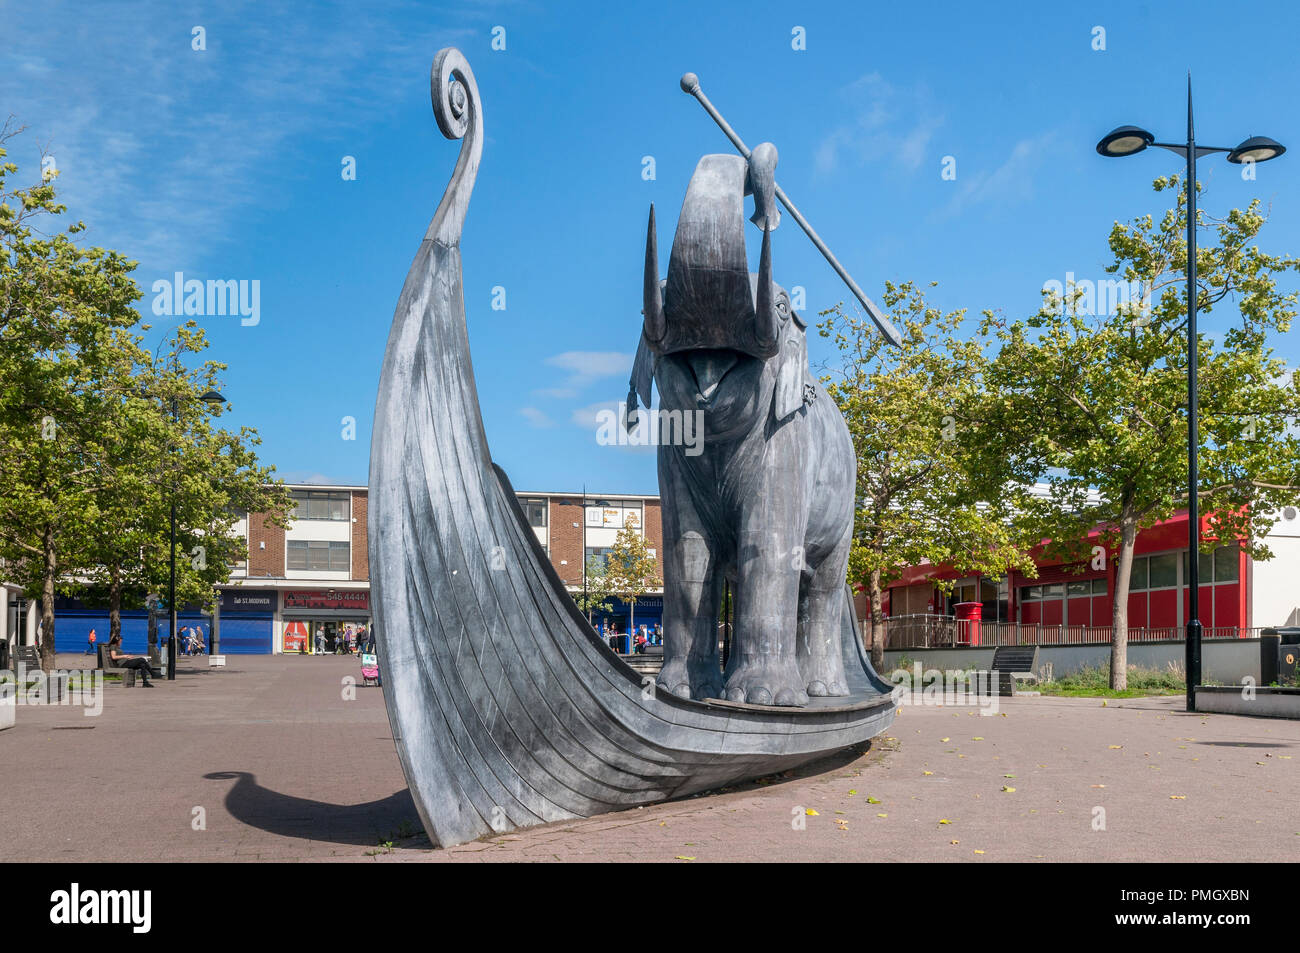 The Enthusiastic Elephant statue in Kirkby town centre. Edward Lear limerick Stock Photo